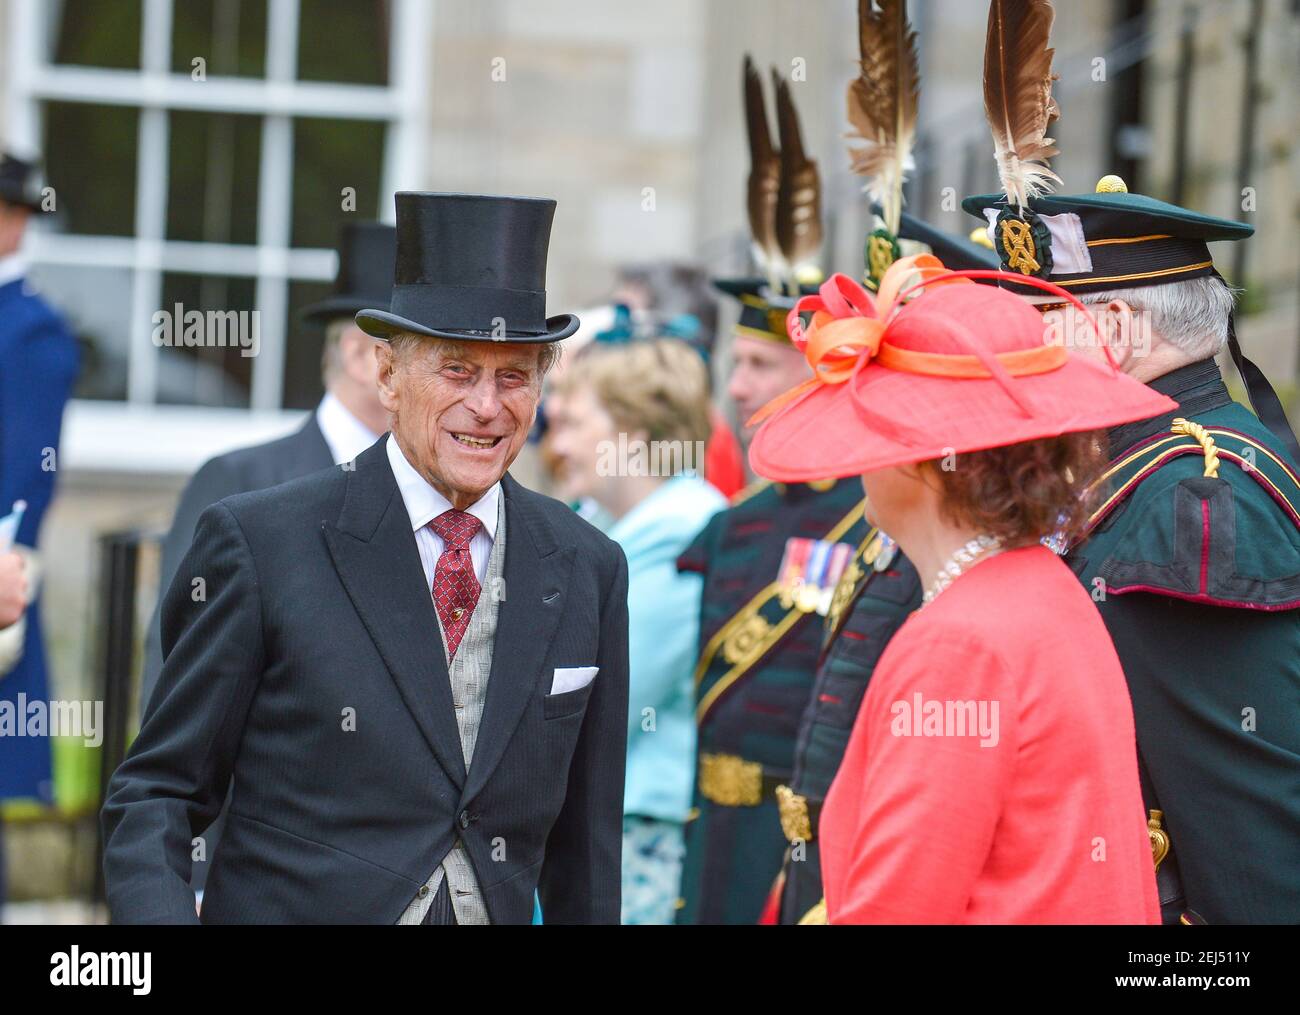 Prince Philip The Duke of Edinburgh at the 2017 a Garden Party at the Palace of Holyroodhouse, Edinburgh. Stock Photo